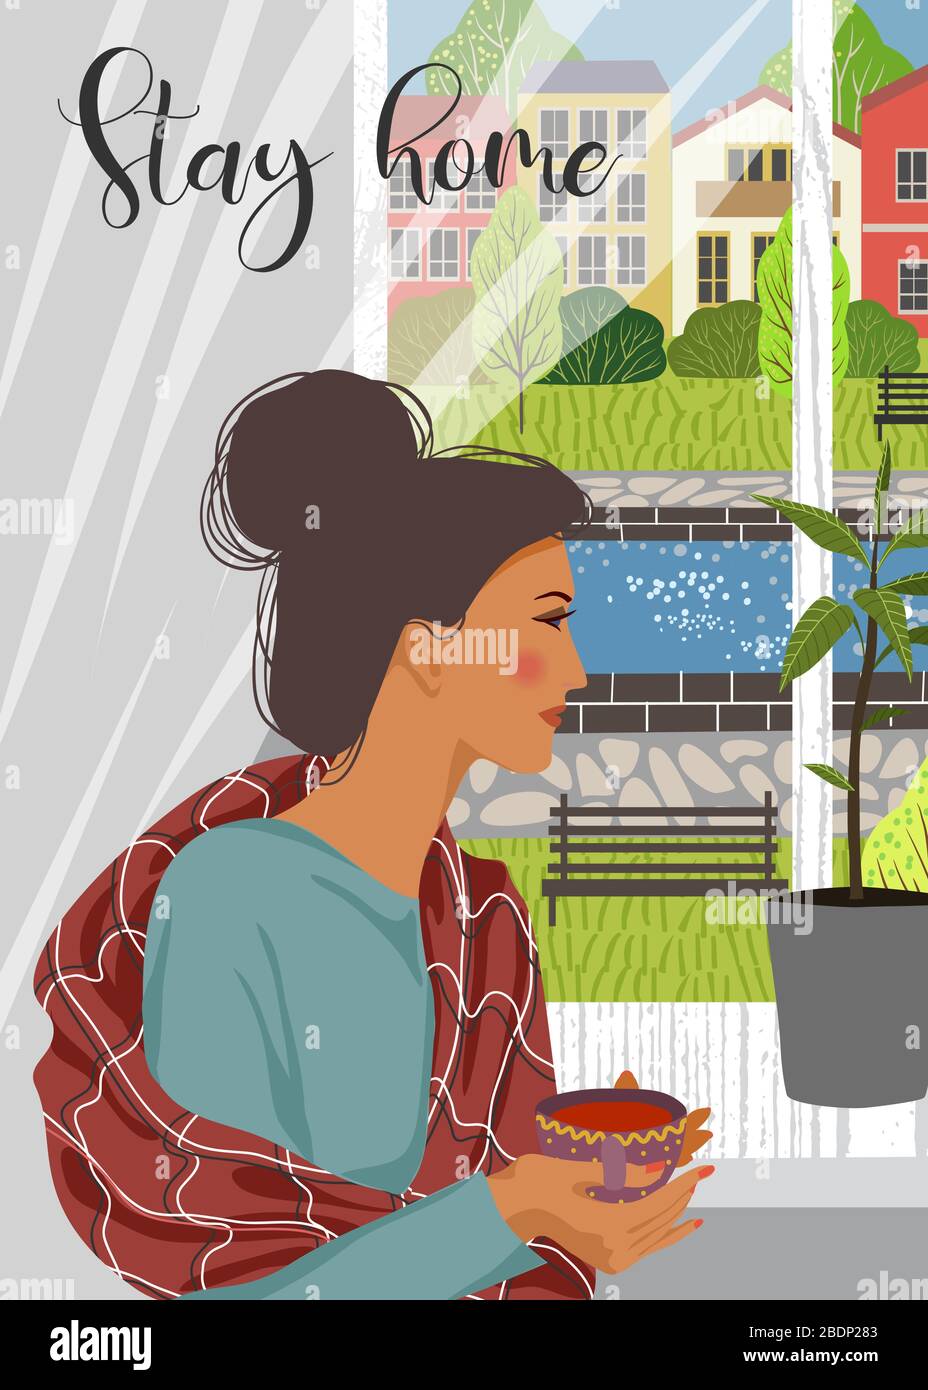 Stay home. Flat vector illustration of woman looking out the window. Outside the window is a deserted cityscape. Stock Vector